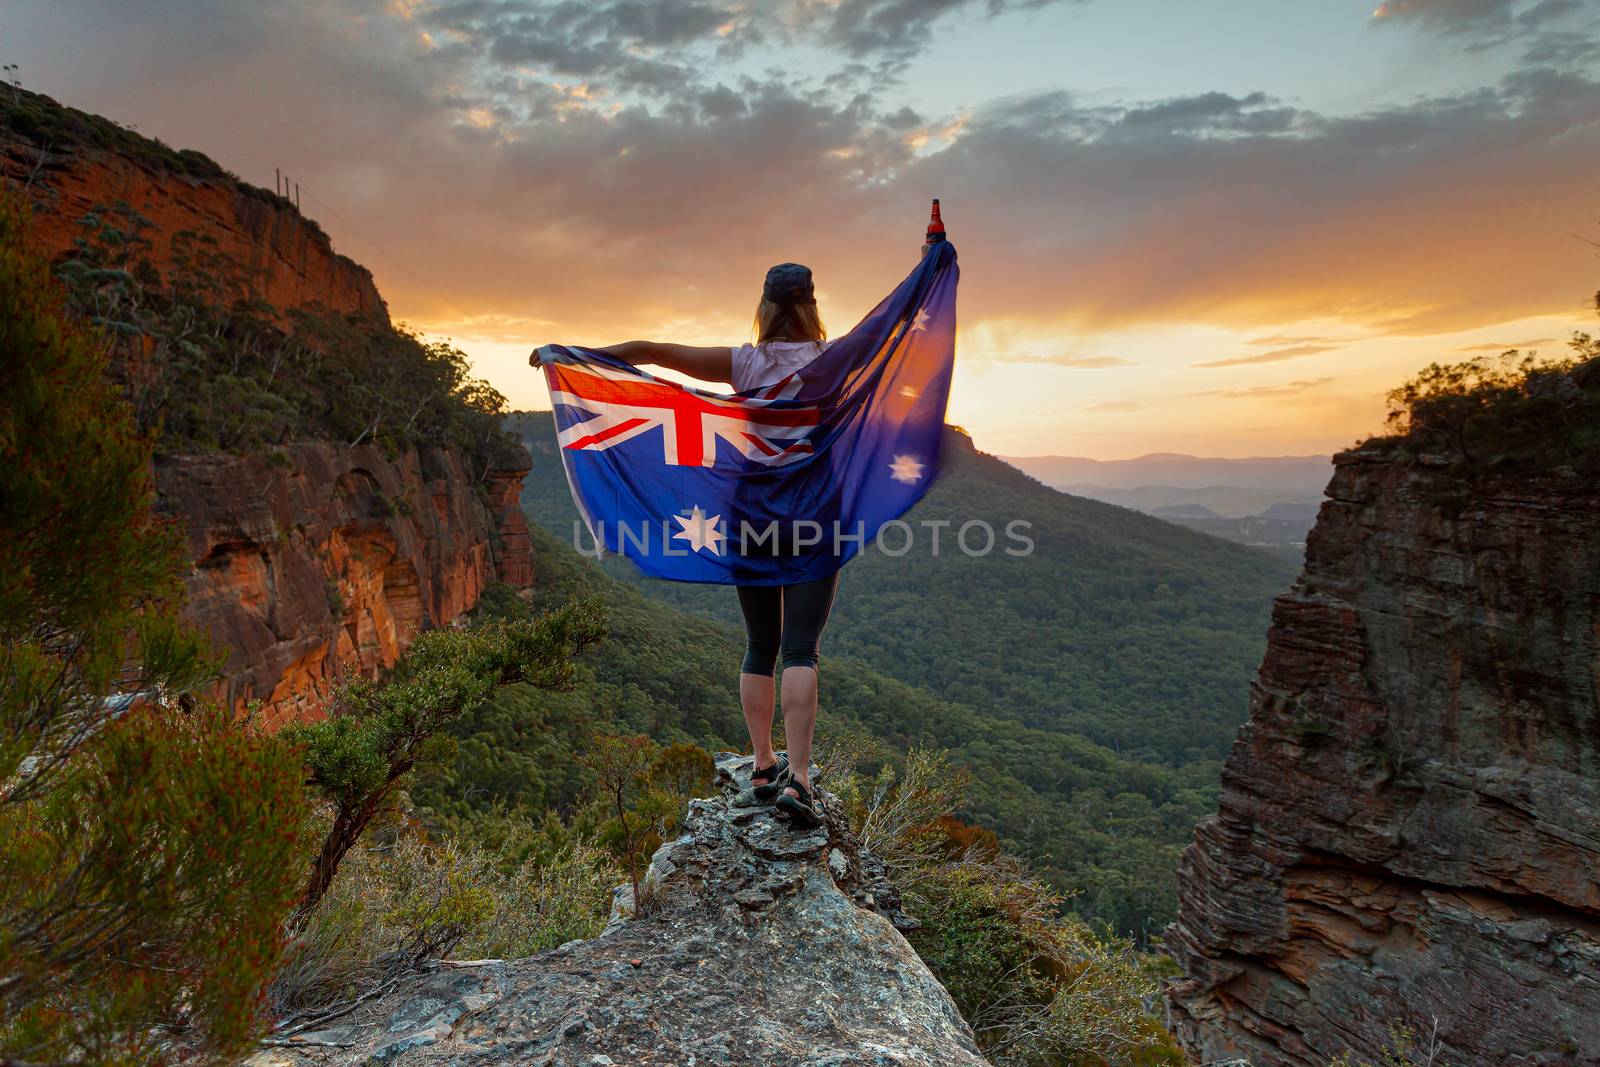 Patriotic woman holding large Australian flag in Blue Mountains Australia.  Celebrate Australia Day, Sports supporter, tourism, Australian travel, Aussie Pride themes.  Selective focus to woman only.  Flag shows some motion from wind.